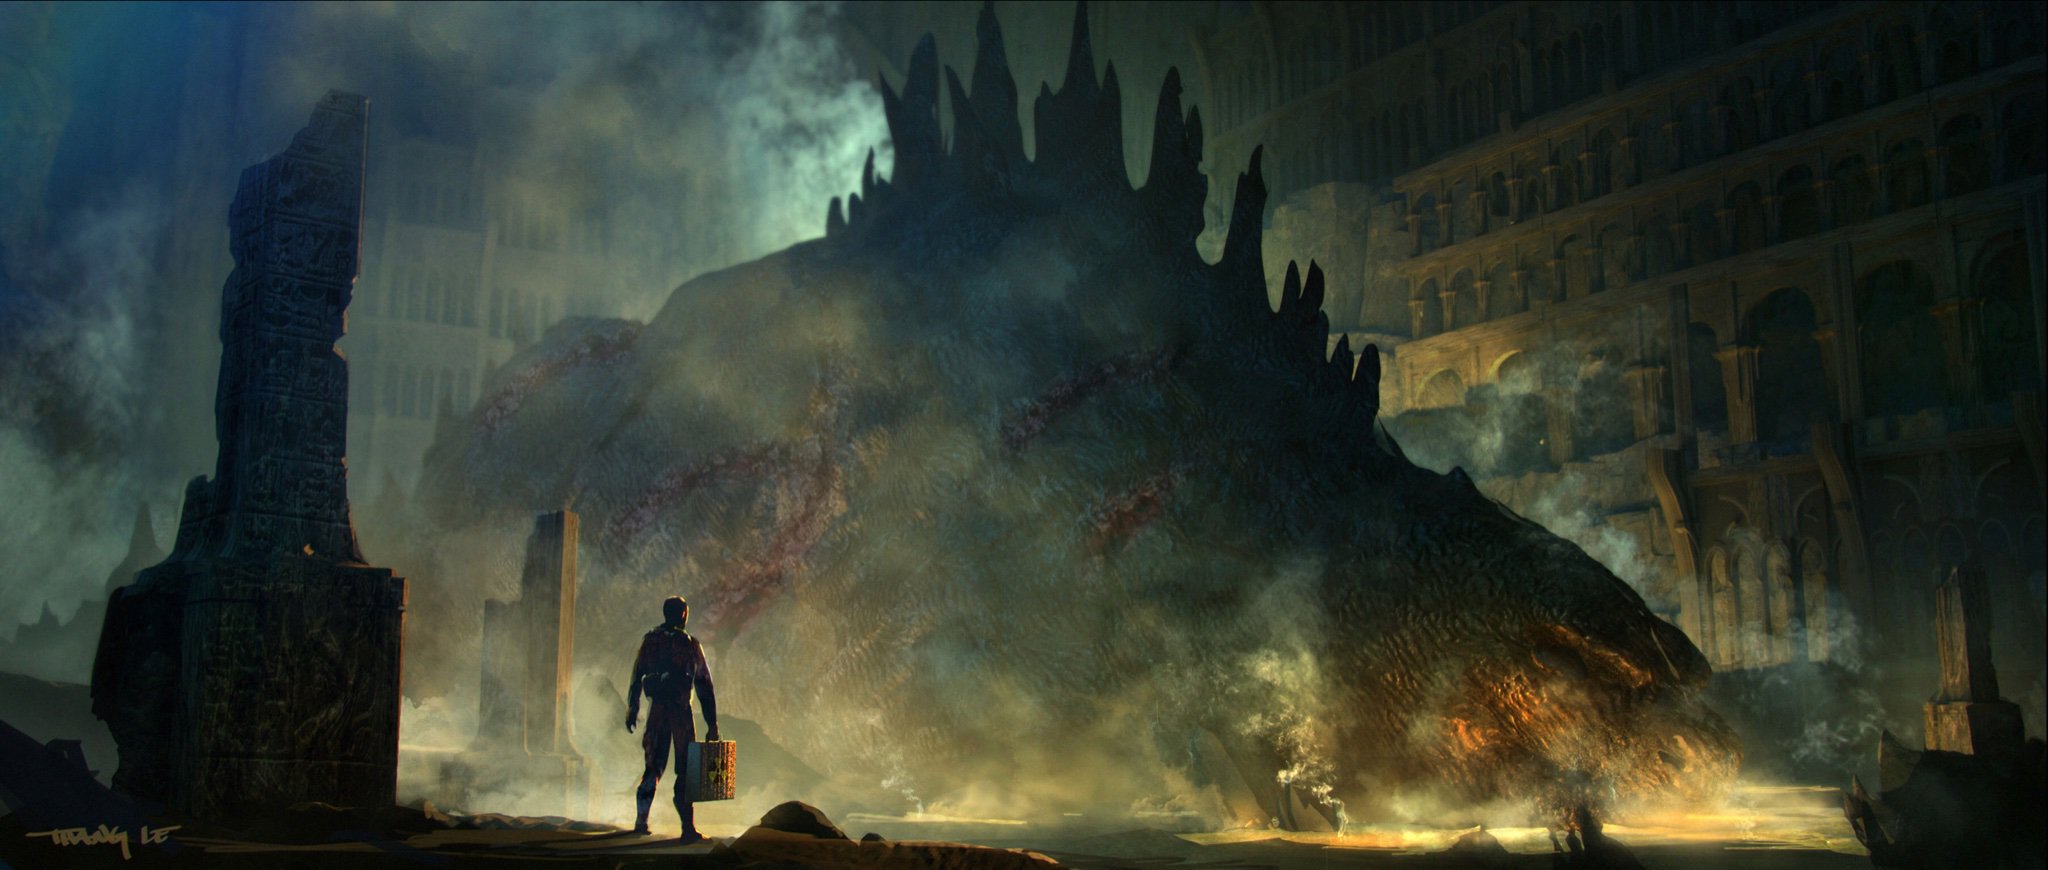 Godzilla King of The Monsters Concept Art 6